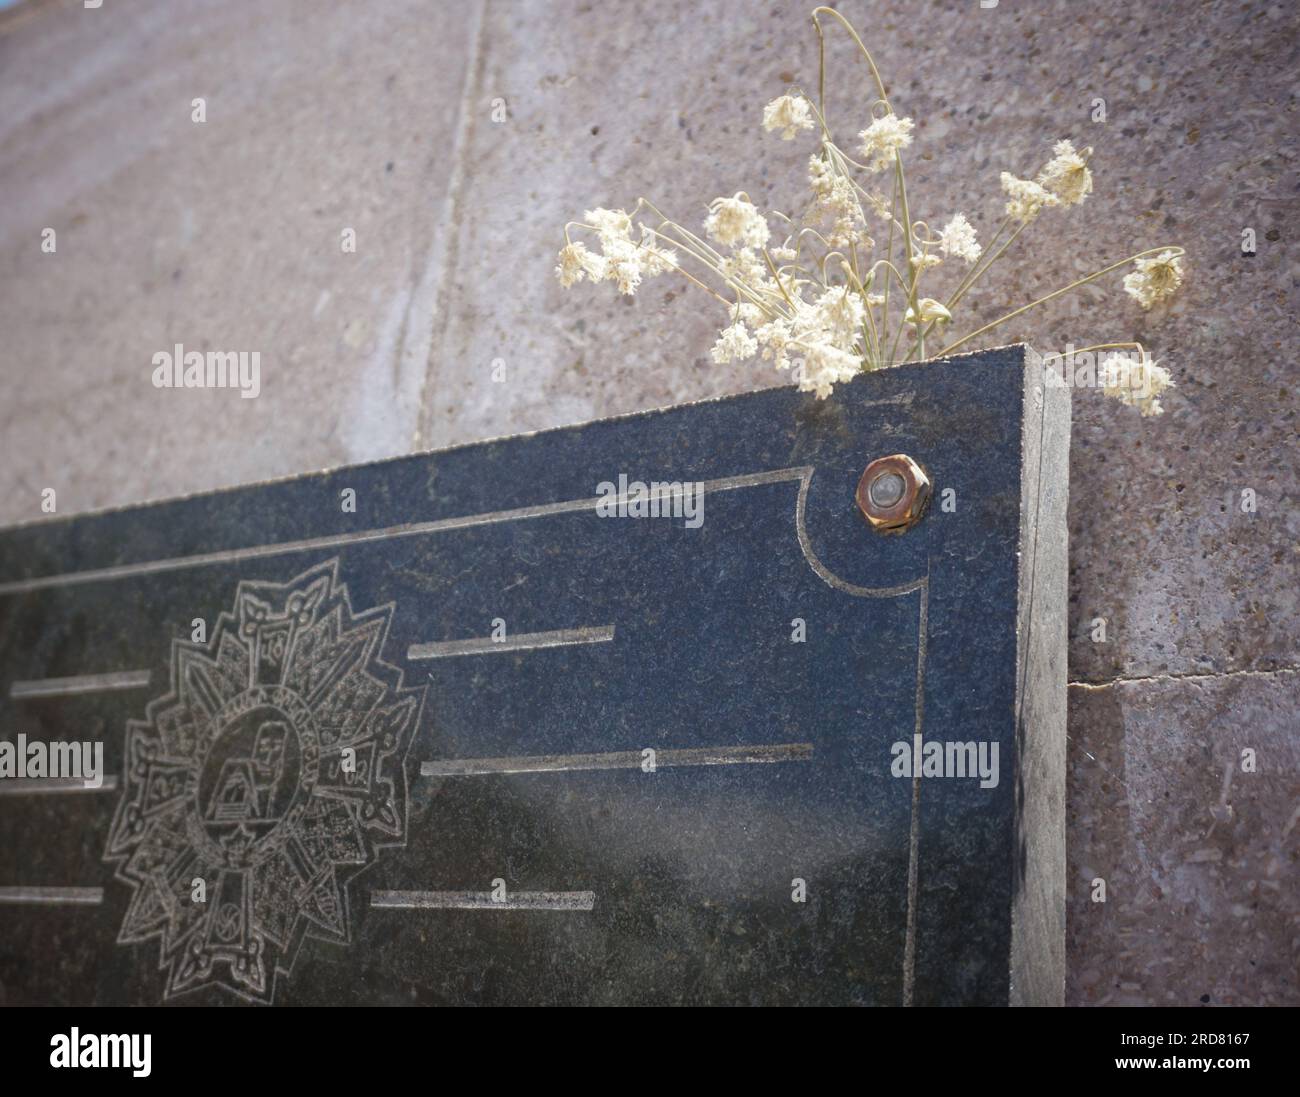 June 13, 2019, Stepanakert, Azerbaijan: Flowers seen placed above the display stone that celebrates the captured Azerbaijani tank by Karabakh people during the First Nagorno-Karabakh War in 1988. The tank is now situated outside the town of Shusha, Nagorno-Karabakh. The unrecognised yet de facto independent country in South Caucasus, Nagorno-Karabakh (also known as Artsakh) has been in the longest-running territorial dispute between Azerbaijan and Armenia in post-Soviet Eurasia since the collapse of Soviet Union. It is mainly populated by ethnic Armenians. (Credit Image: © Jasmine Leung/SOPA I Stock Photo